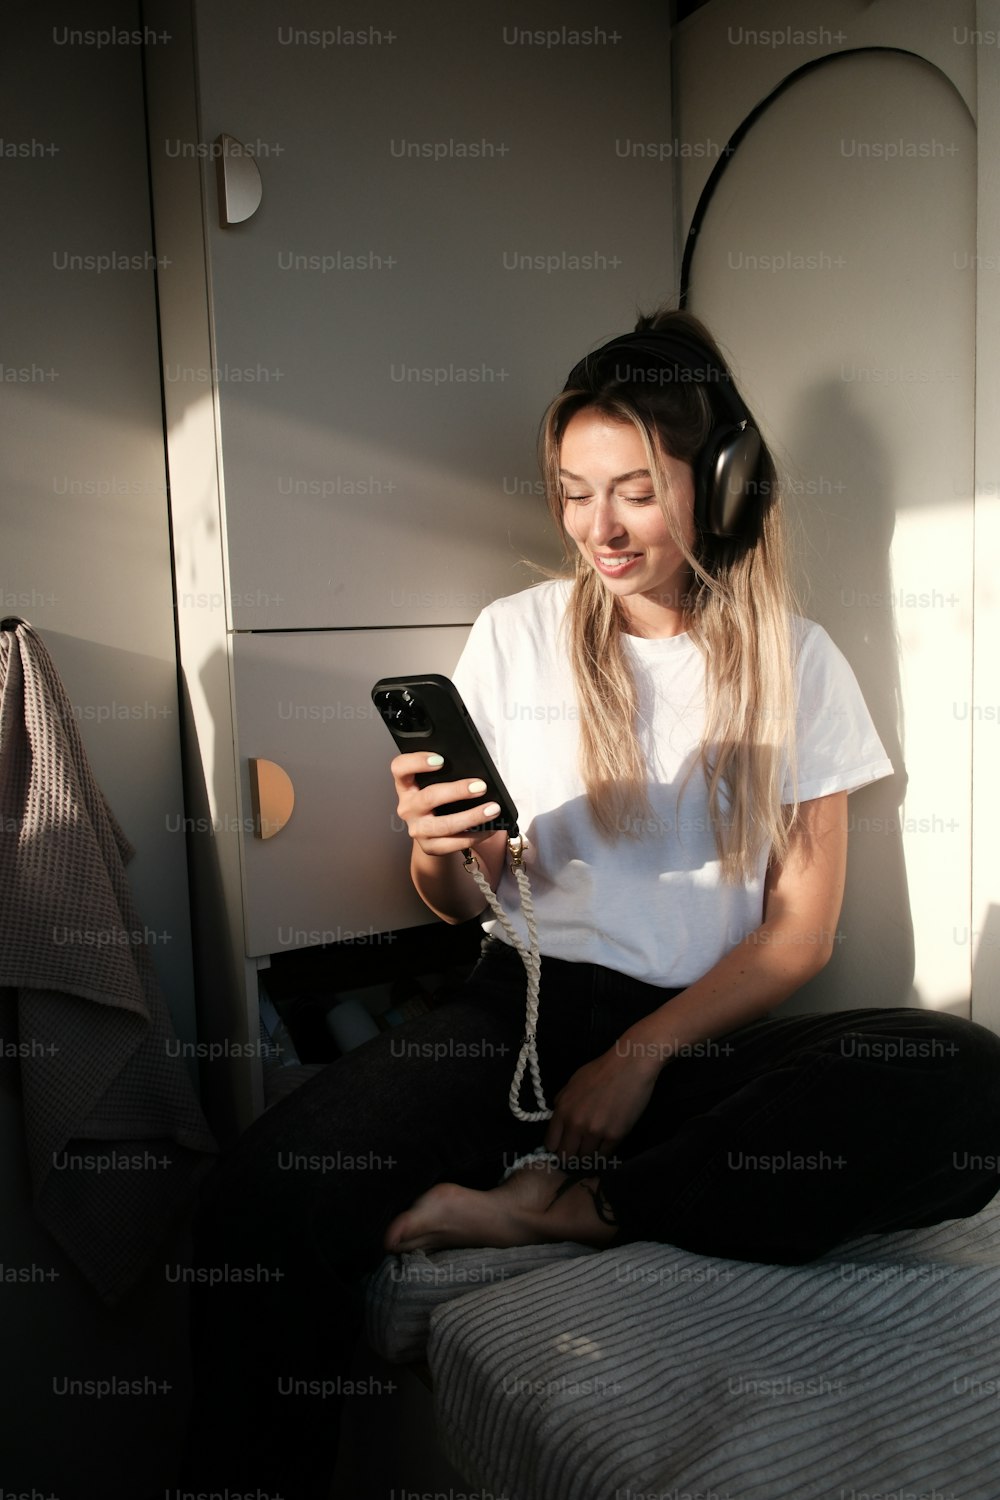 a woman sitting on a bed with headphones on